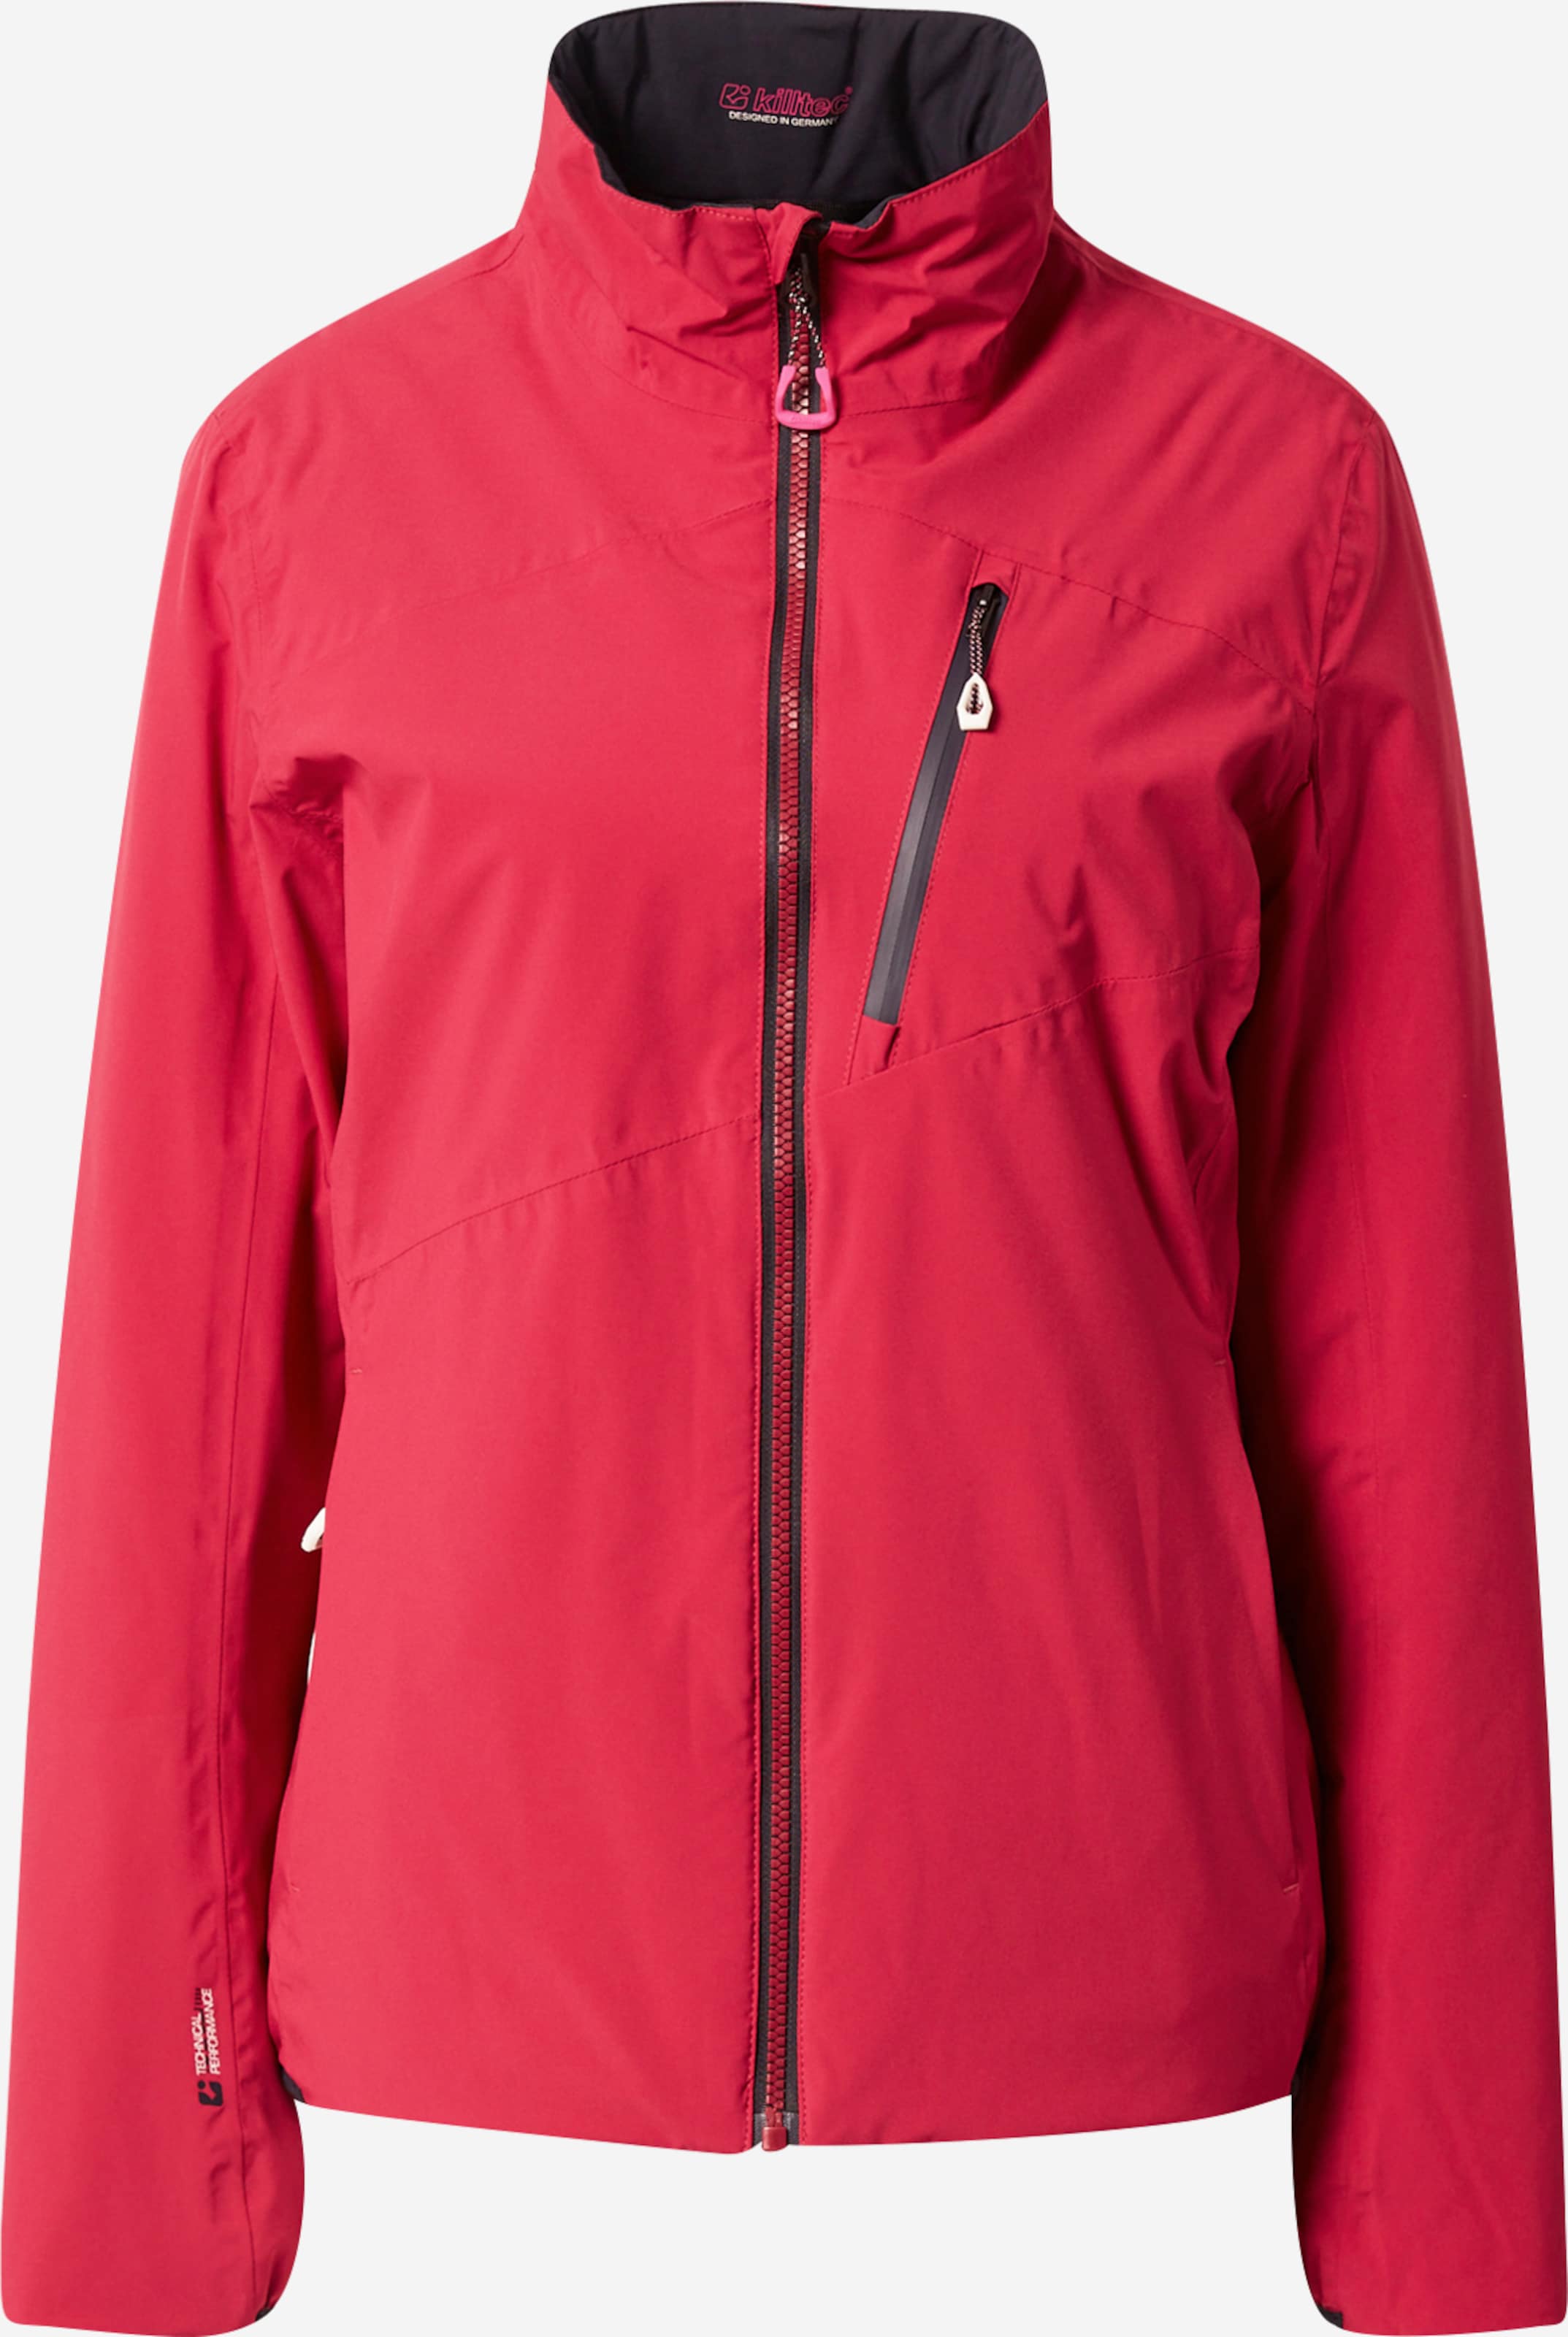 Bright | Outdoor YOU \'KOW\' Navy, ABOUT Jacket KILLTEC Red in